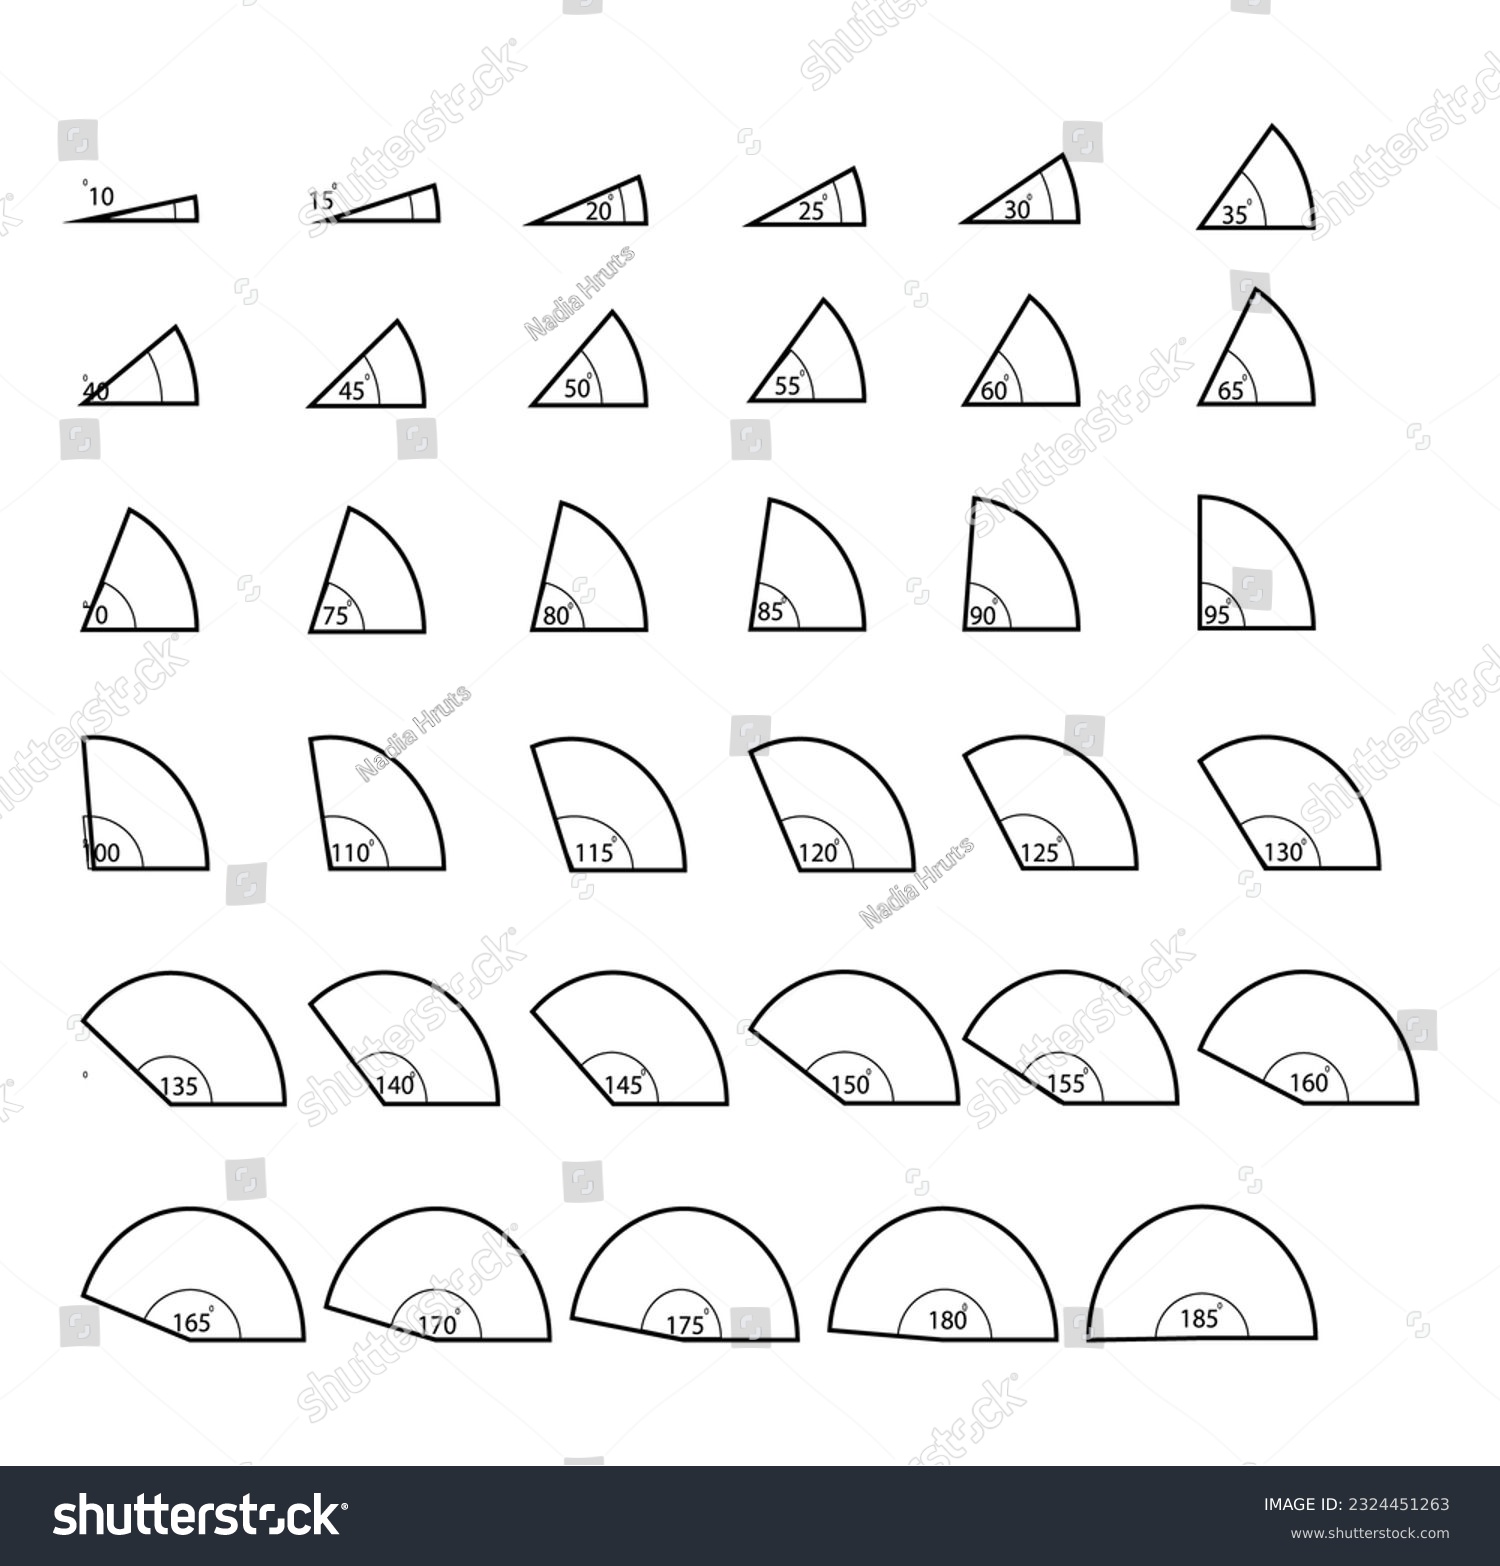 SVG of Angles set with different degrees. 10,15,20,25, 30,35,40, 45,50,55, 60,65,70, 75,80,85, 90,95,100, 110,115, 120,125,130,135,140,145, 150,155,160,165,170,175,180,185degree. Geometric and mathematical  svg